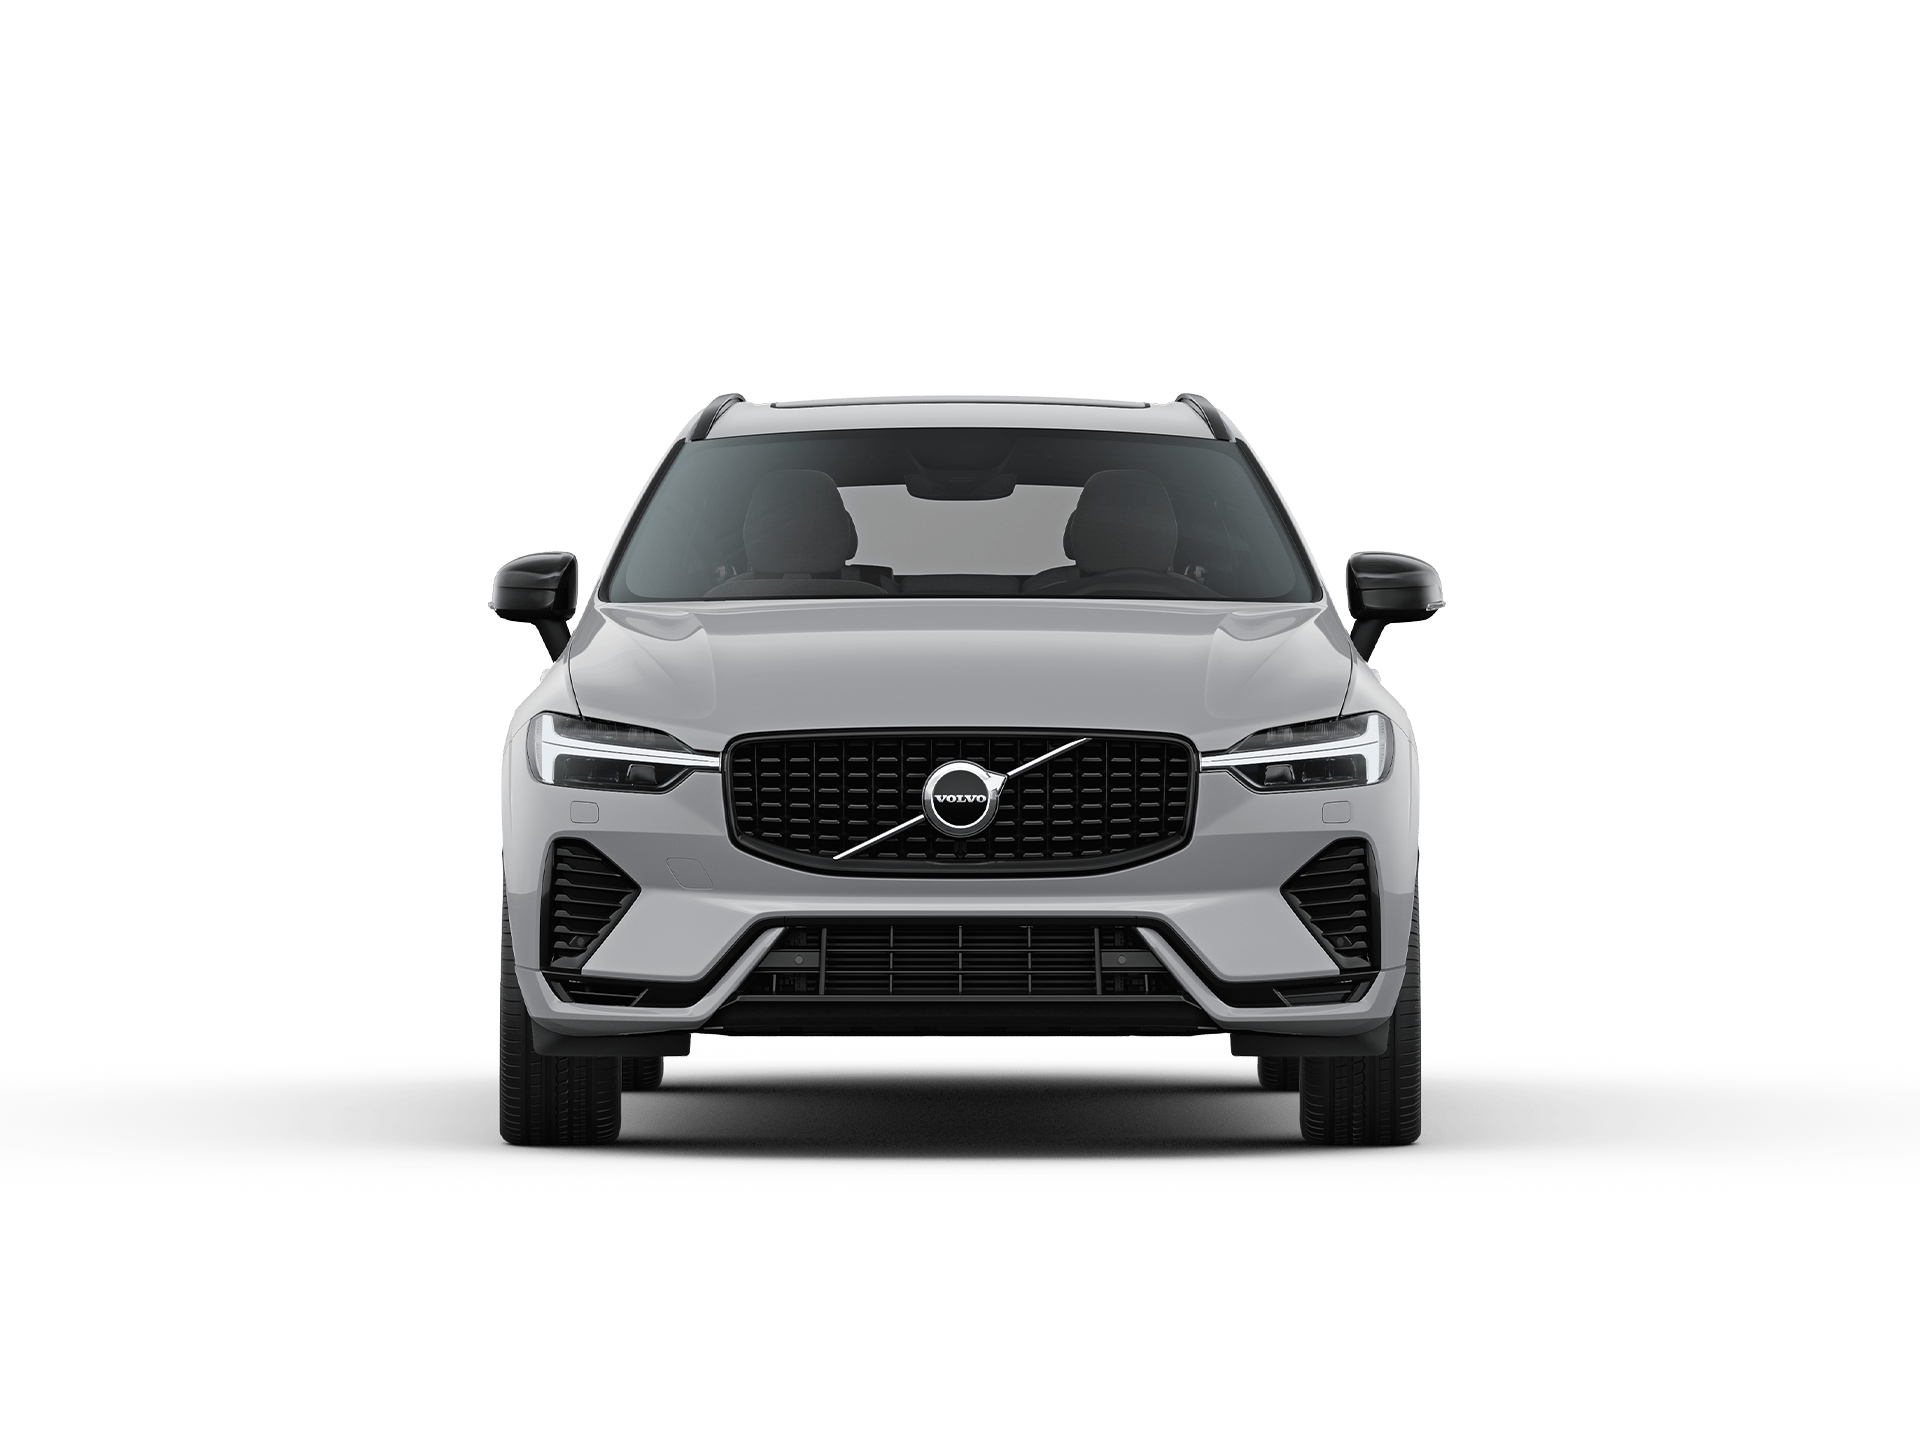 The front of a Volvo XC60 Recharge SUV.